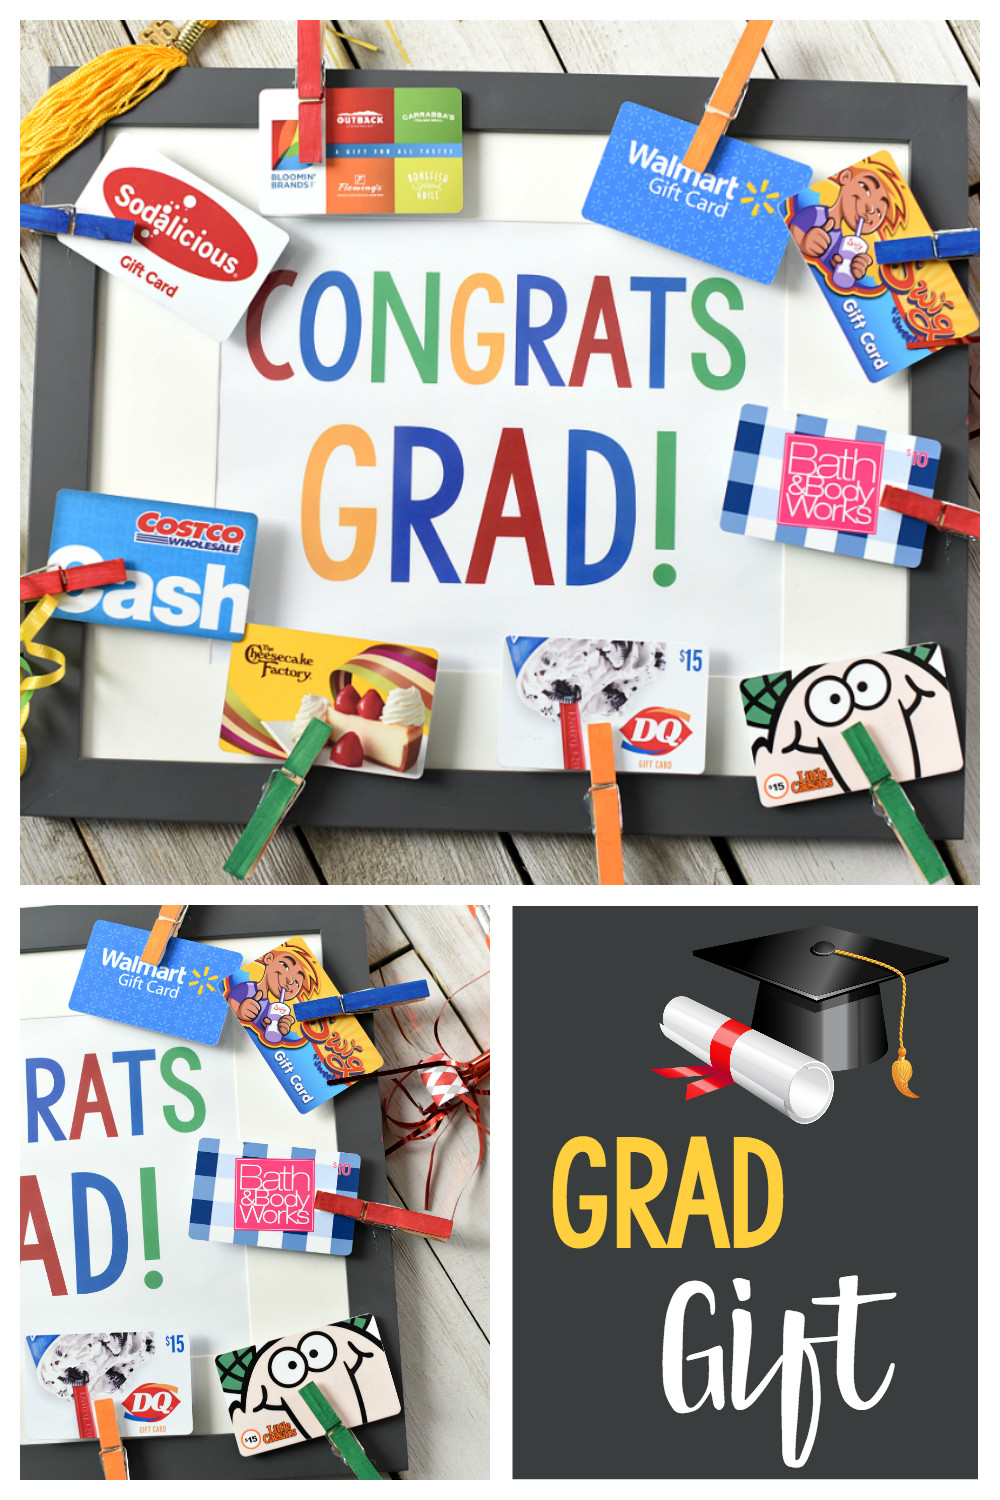 Graduation Jewelry Gift Ideas For Her
 Cute Graduation Gifts Congrats Grad Gift Card Frame – Fun